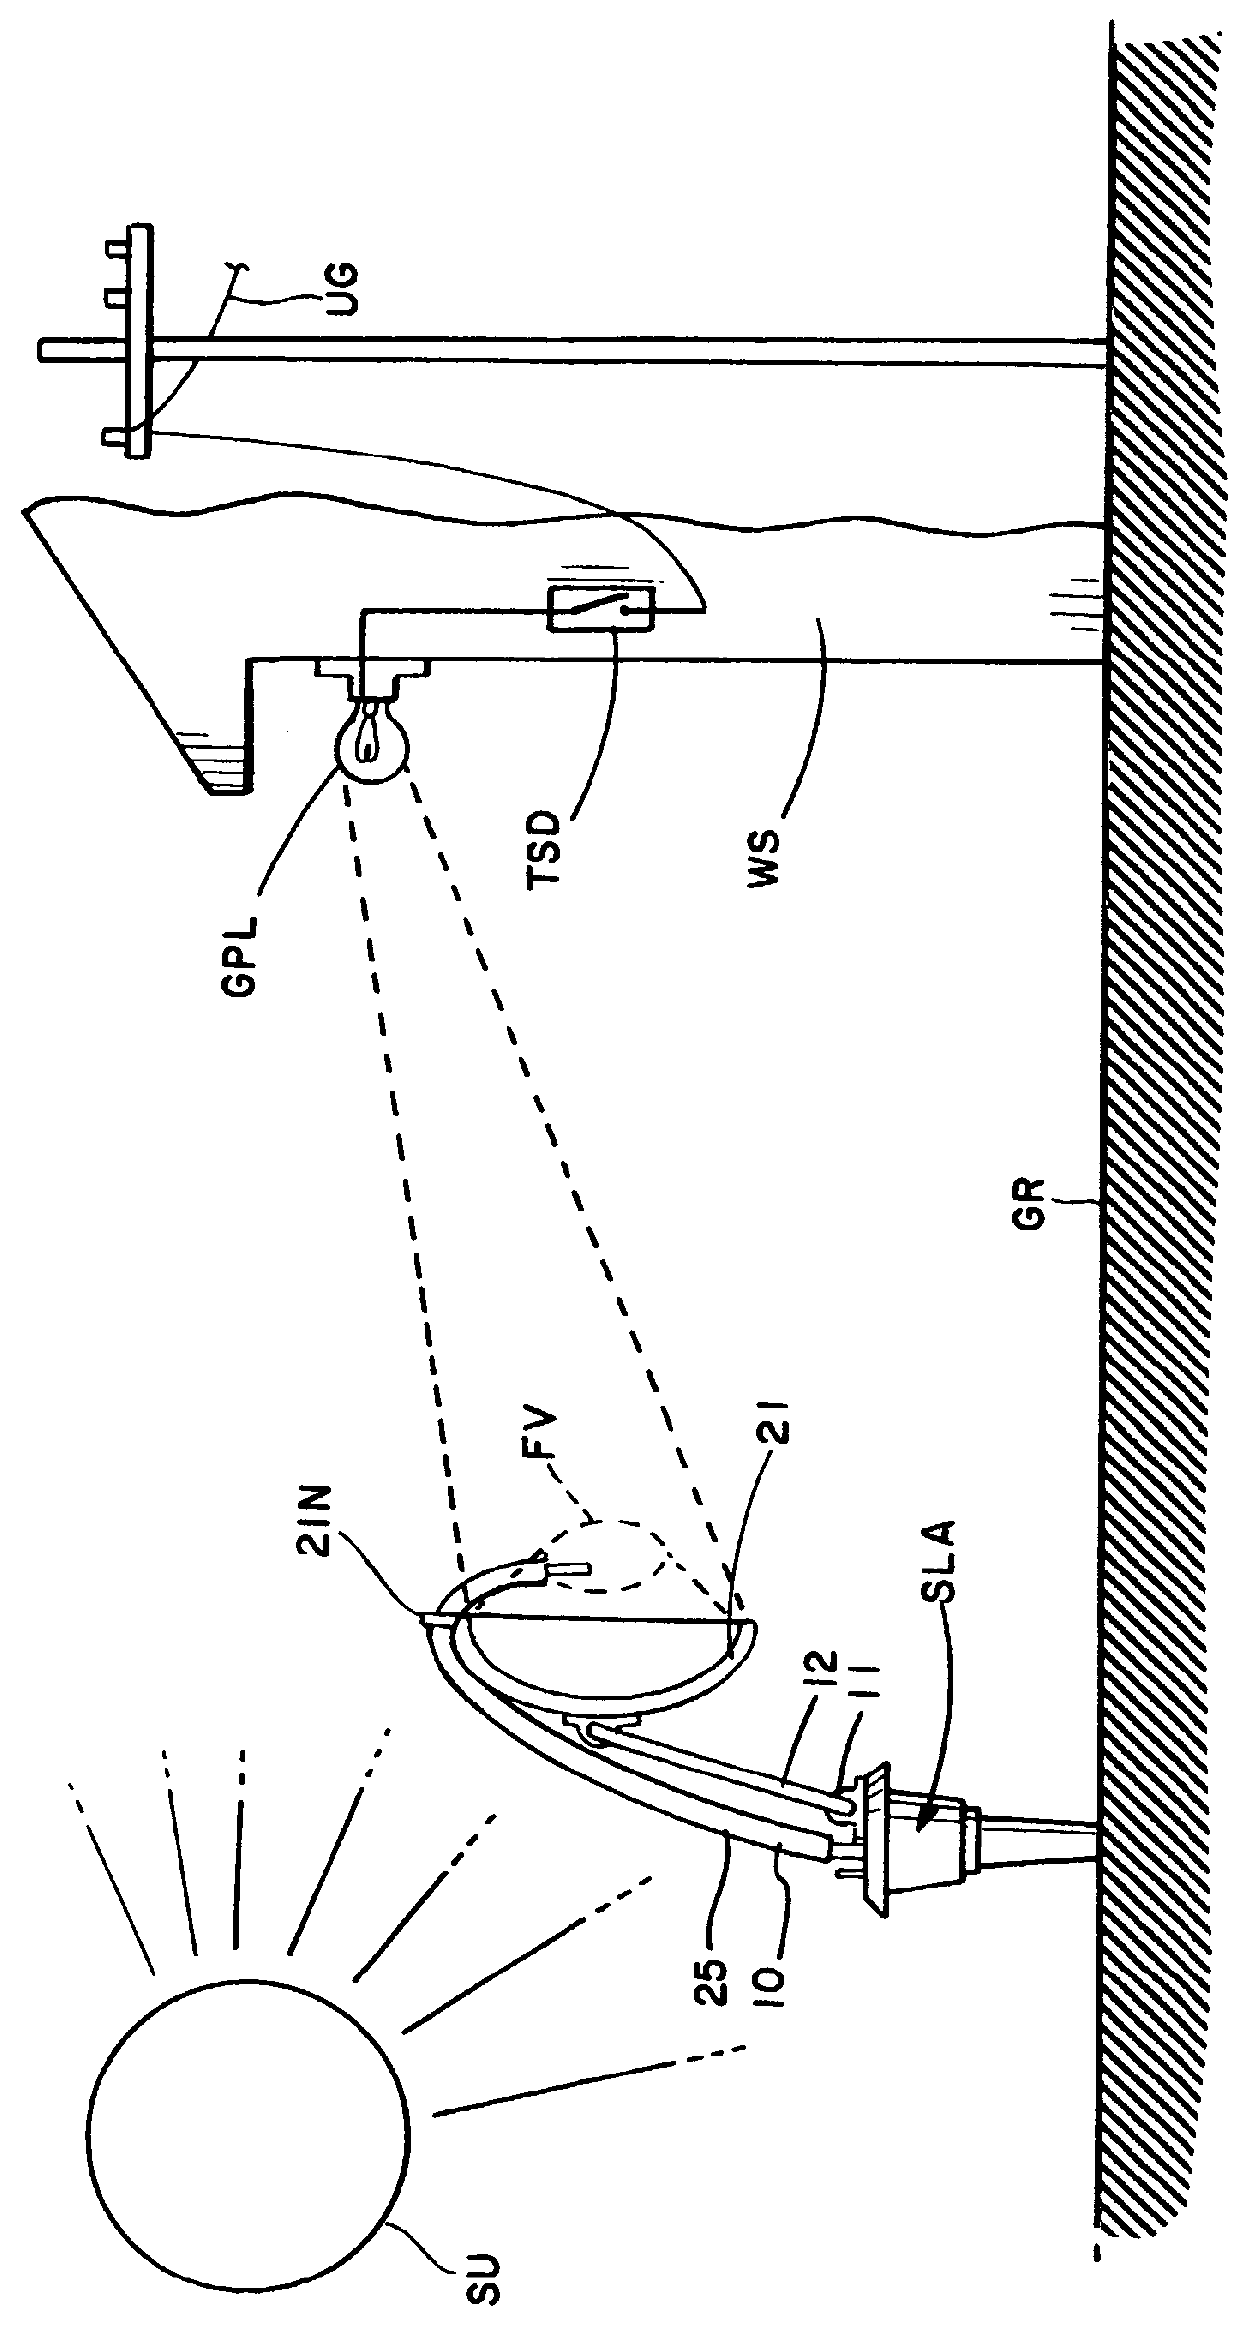 Method and apparatus for adhesively attaching a light collecting reflector to enable a solar light comprising a bendable strap and a light conveying means